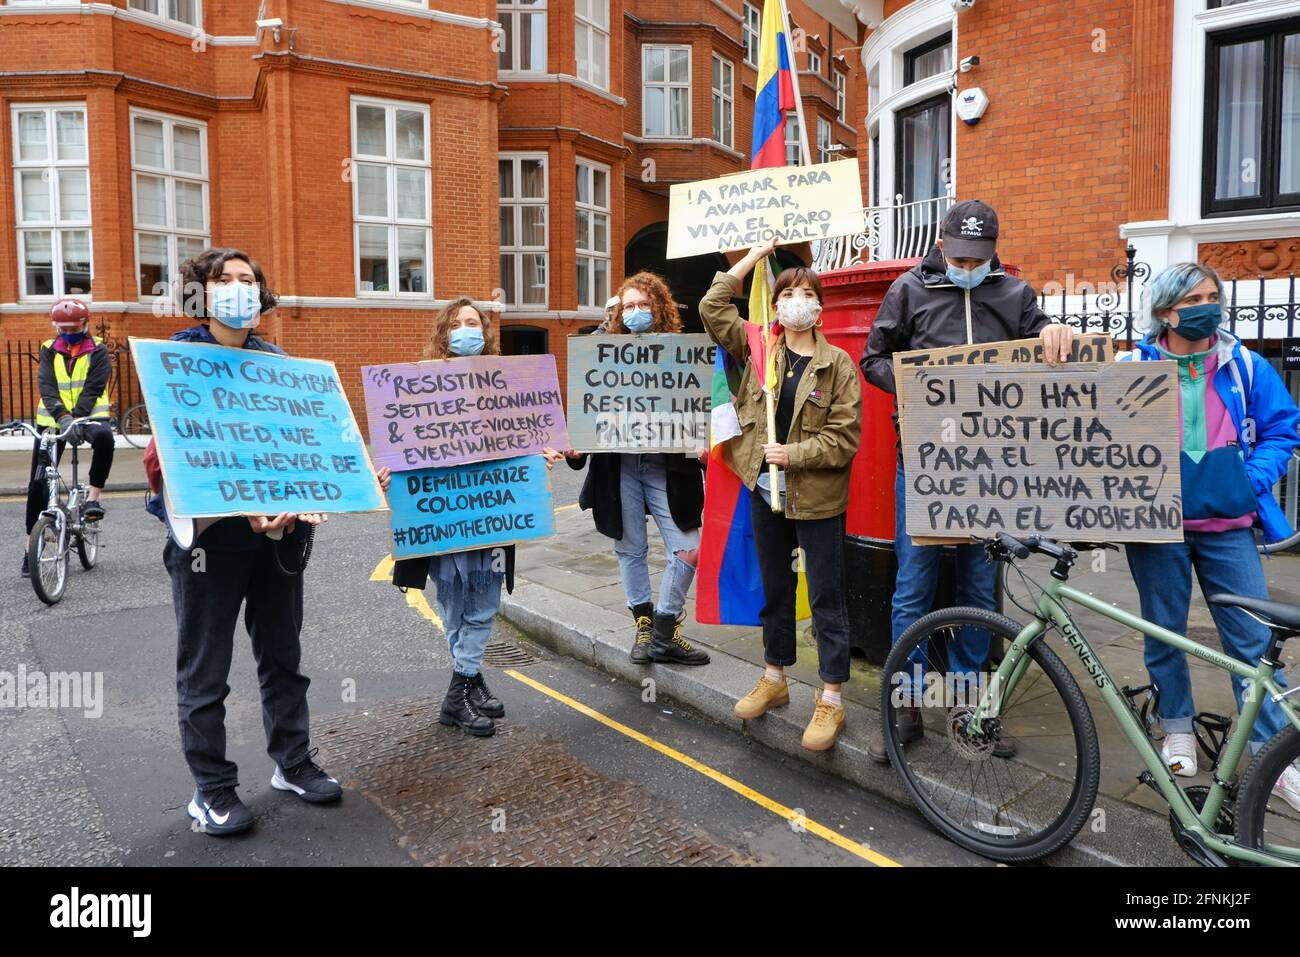 London, UK. 15/05/21 A protest takes place outside the Colombian embassy after the killings of civilians by police who protested against tax reform Stock Photo